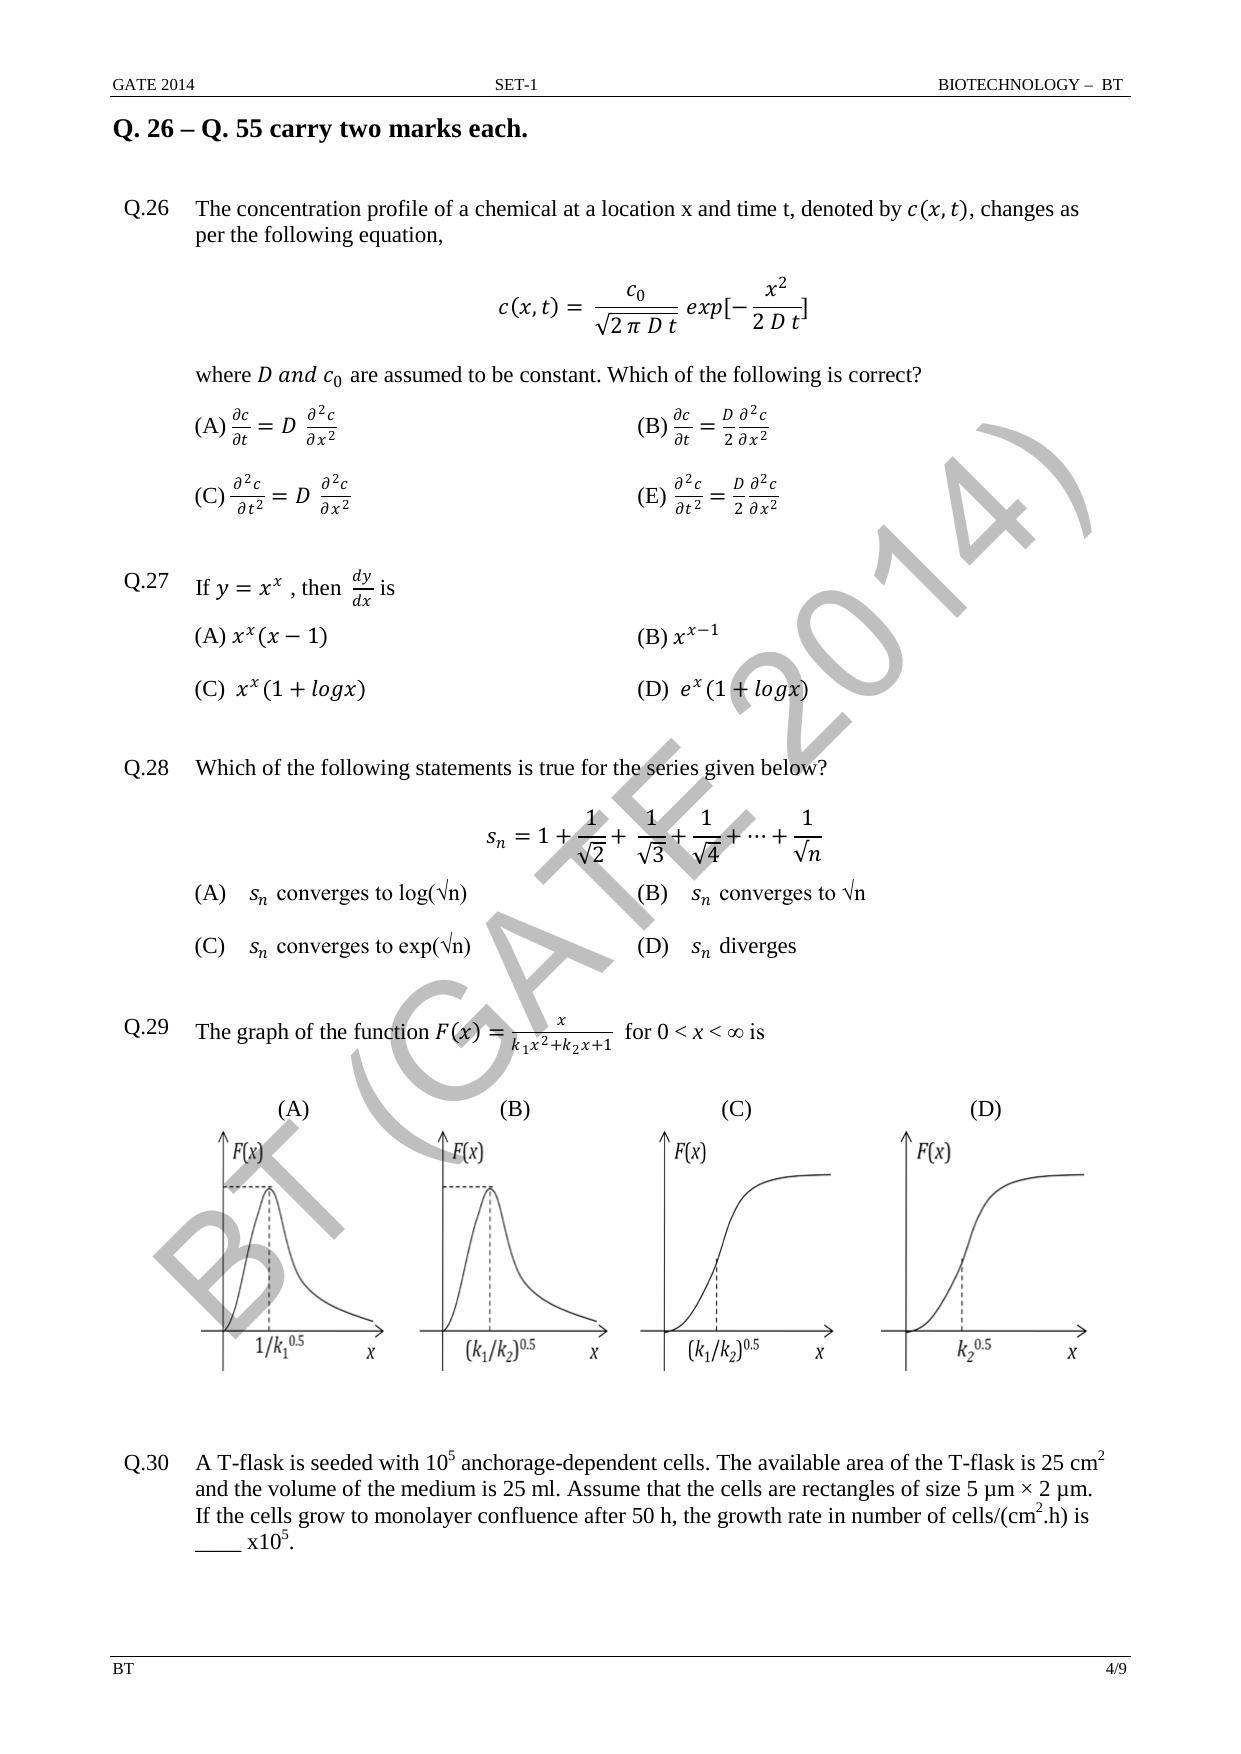 GATE 2014 Biotechnology (BT) Question Paper with Answer Key - Page 10